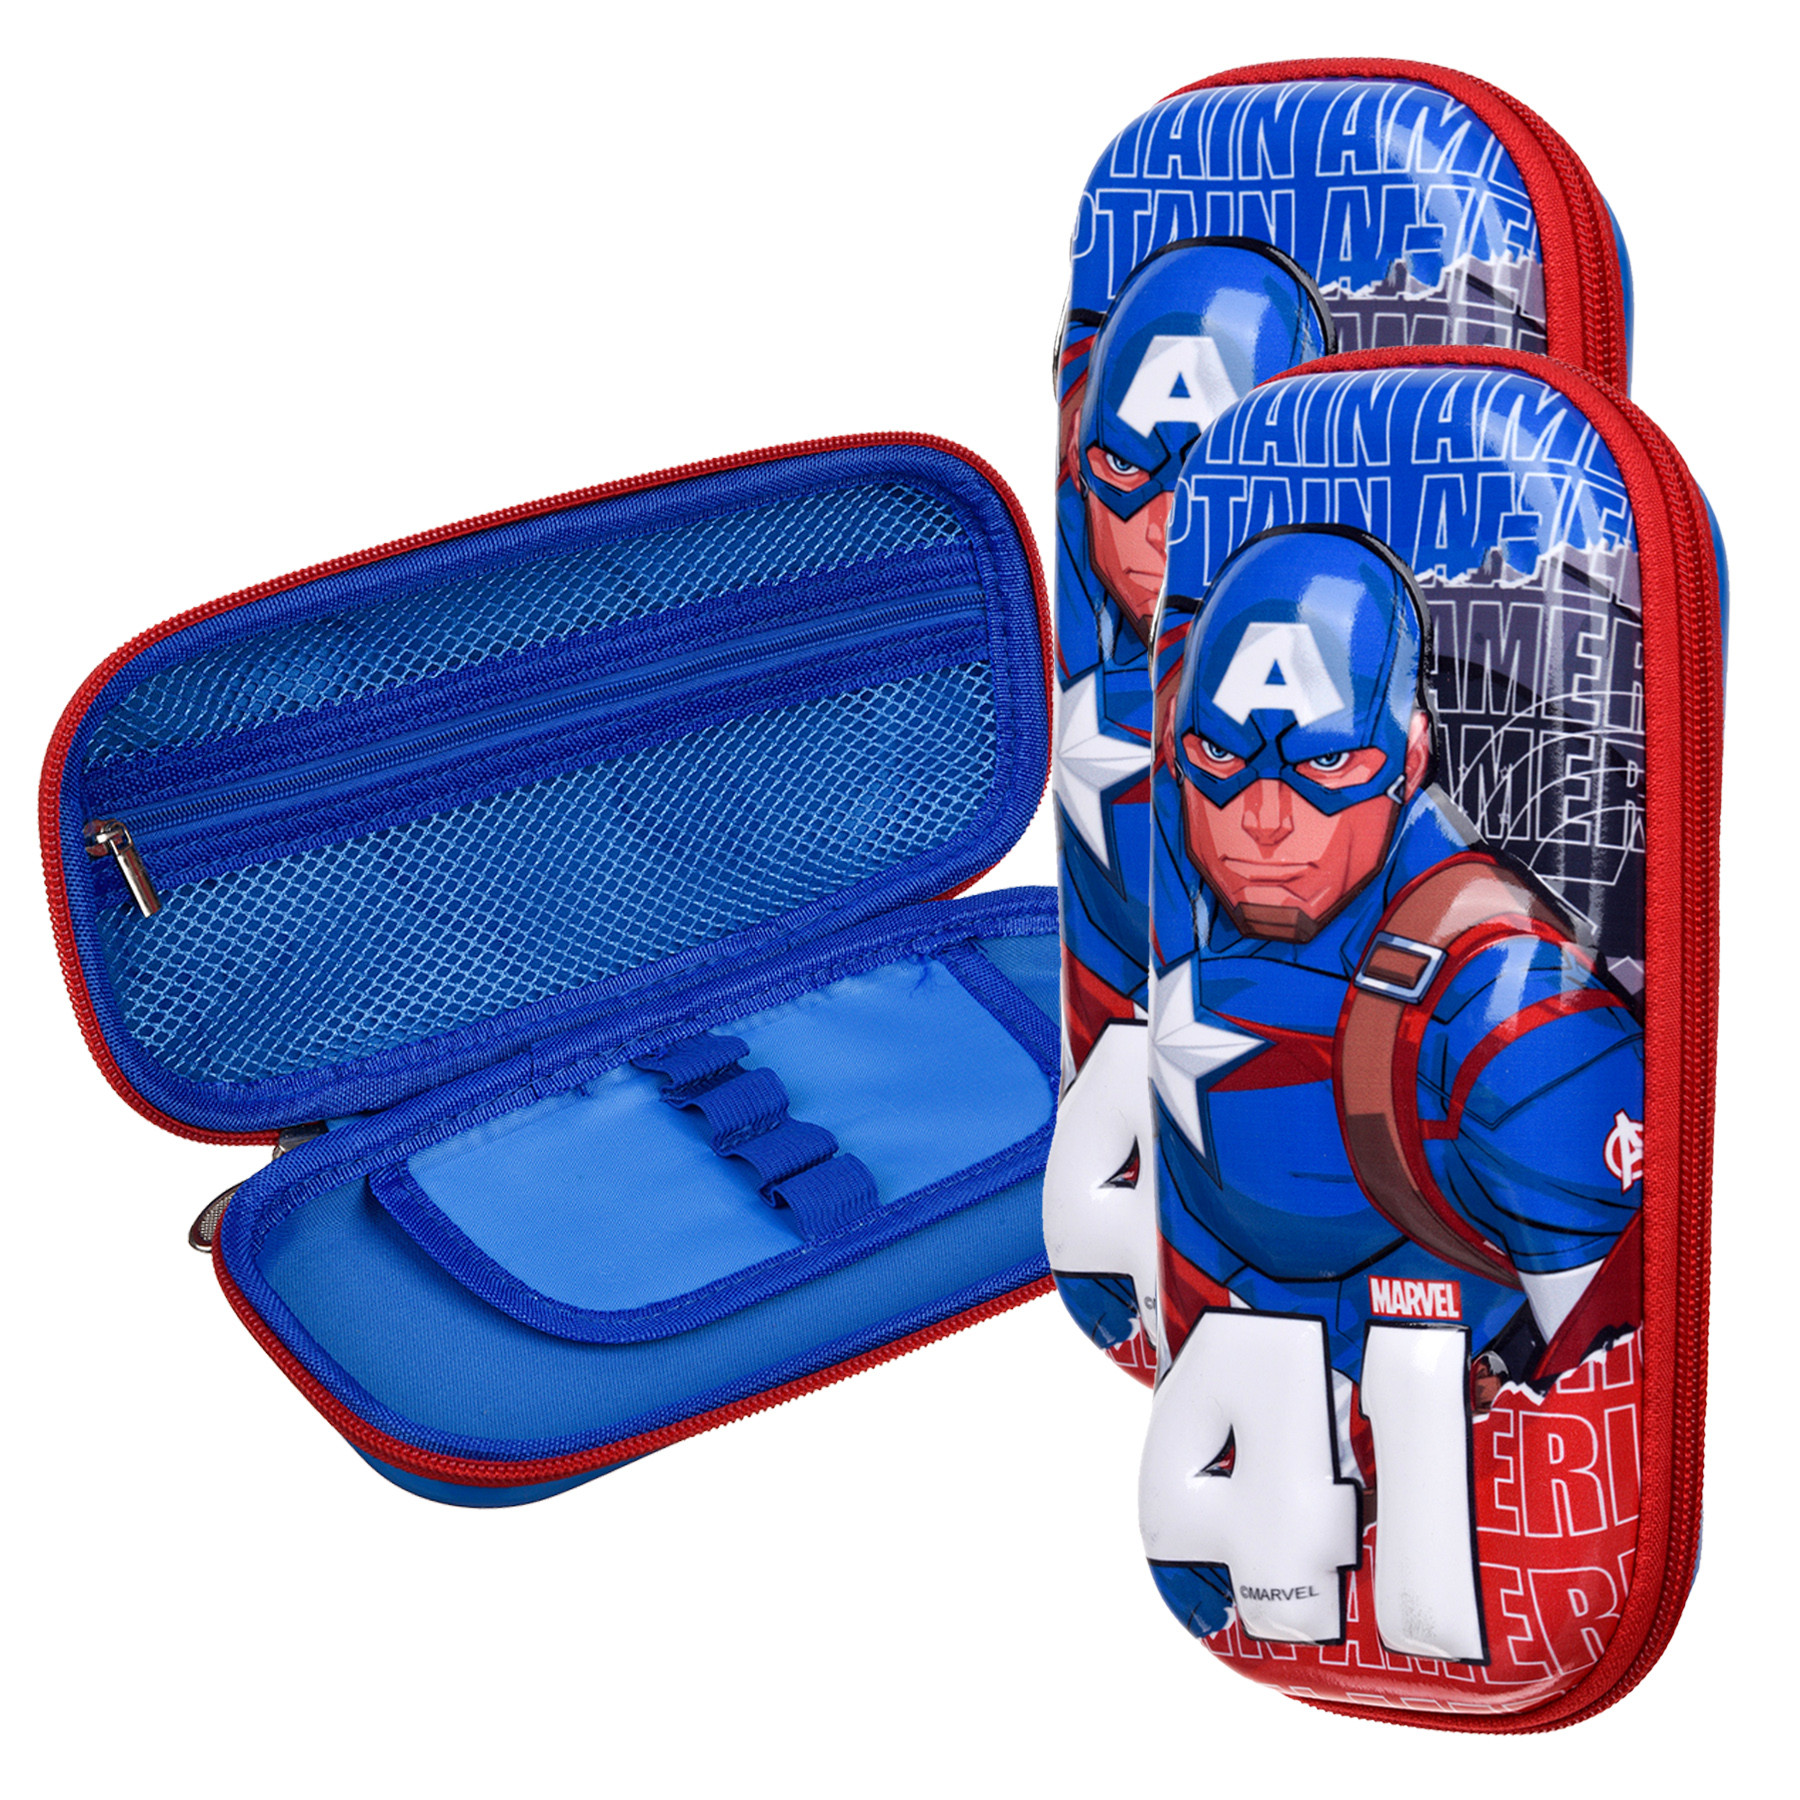 Kuber Industries Marvel Captain America Pencil Pouch | School Pencil Case for Kids | Pen-Pencil Box for Kids | Geometry Box | Compass Box | School Stationery Supplies | Blue